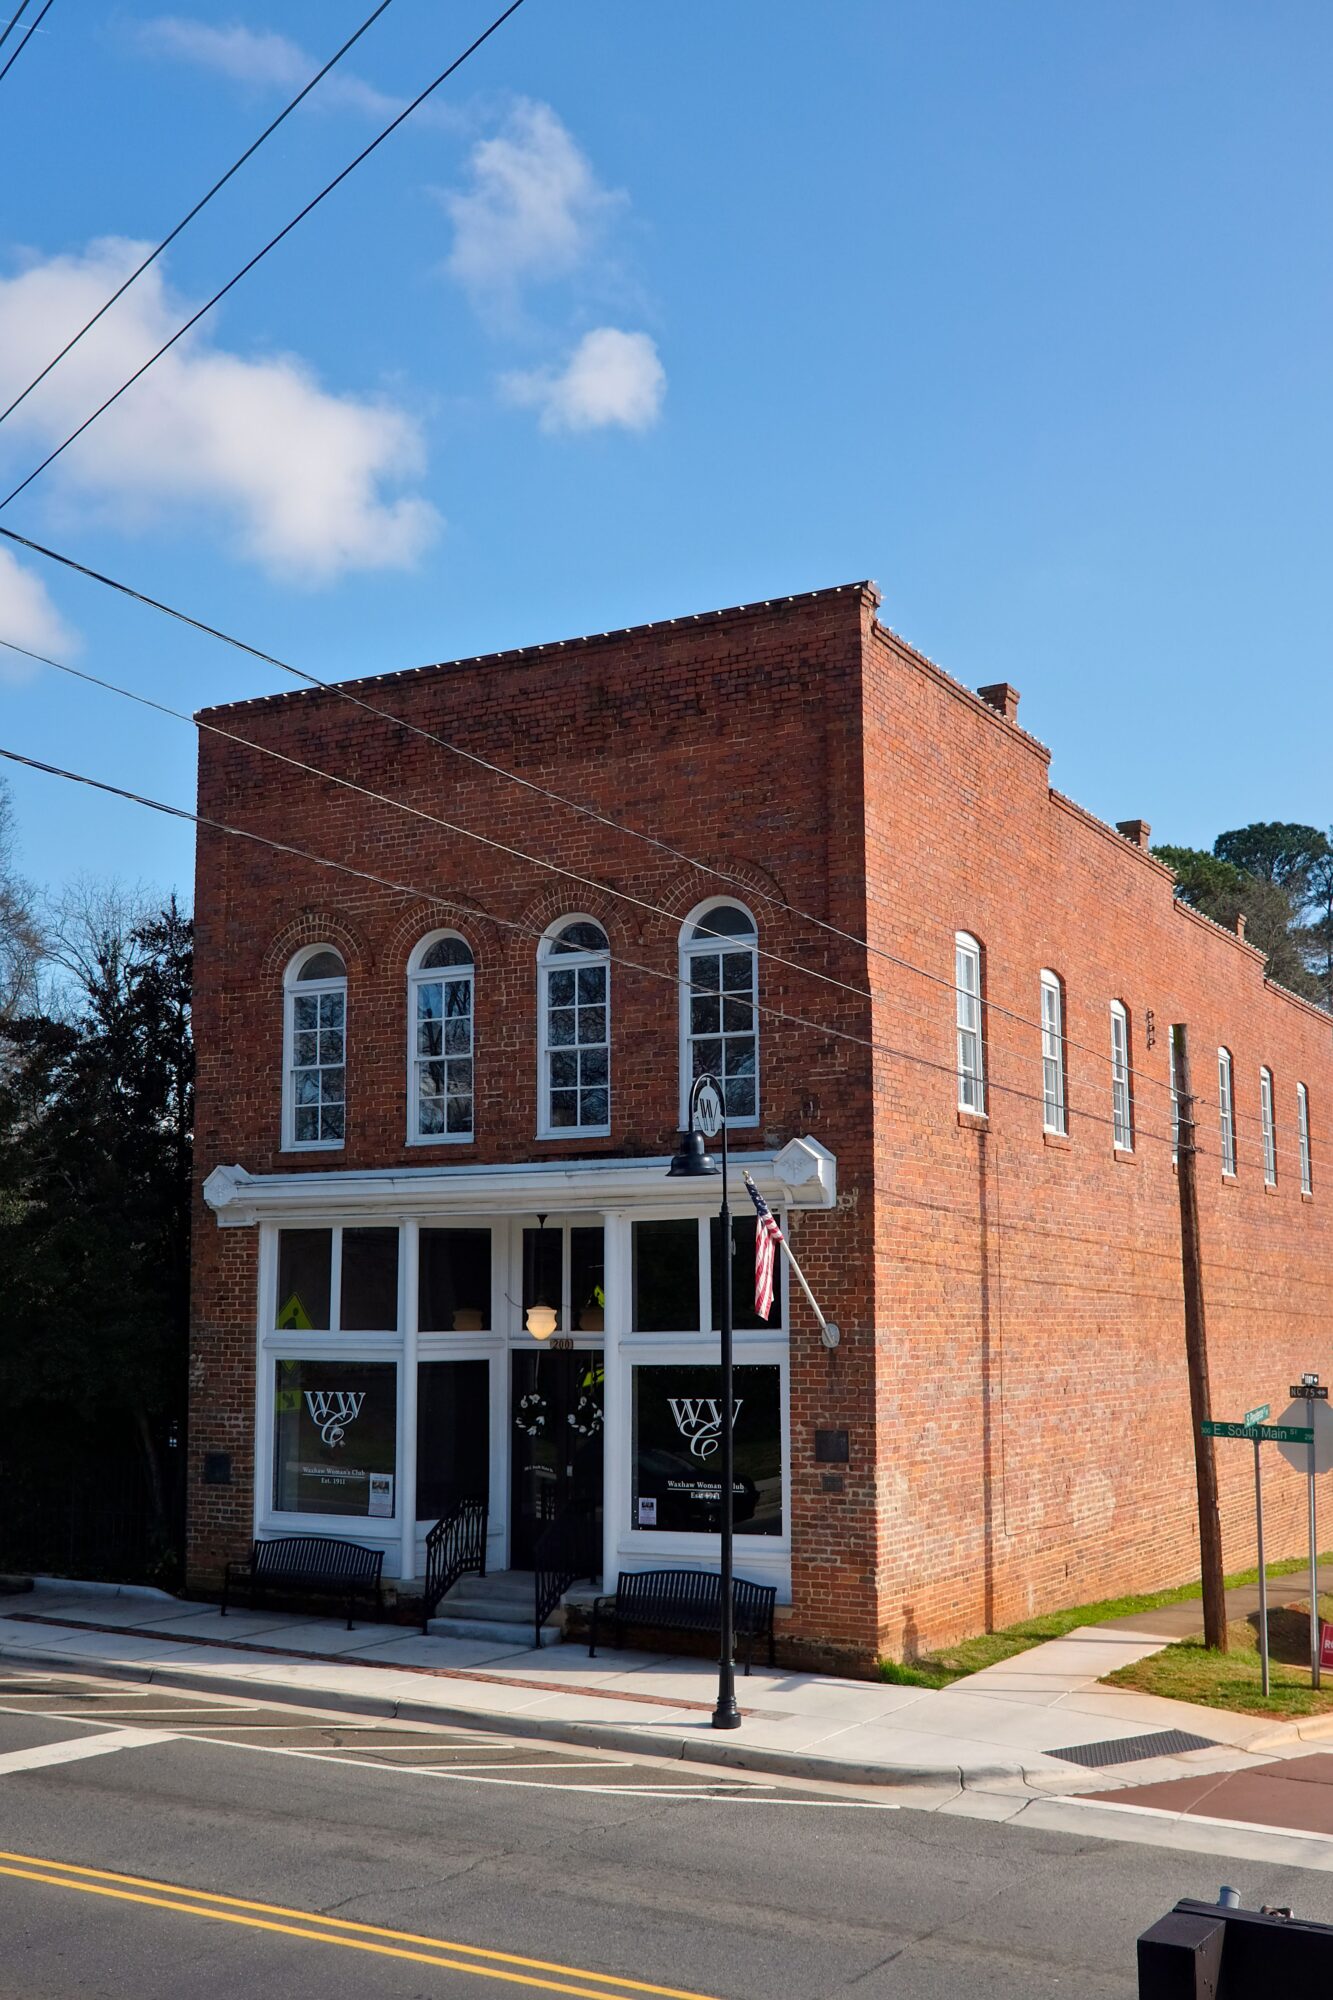 A historic brick building in Waxhaw